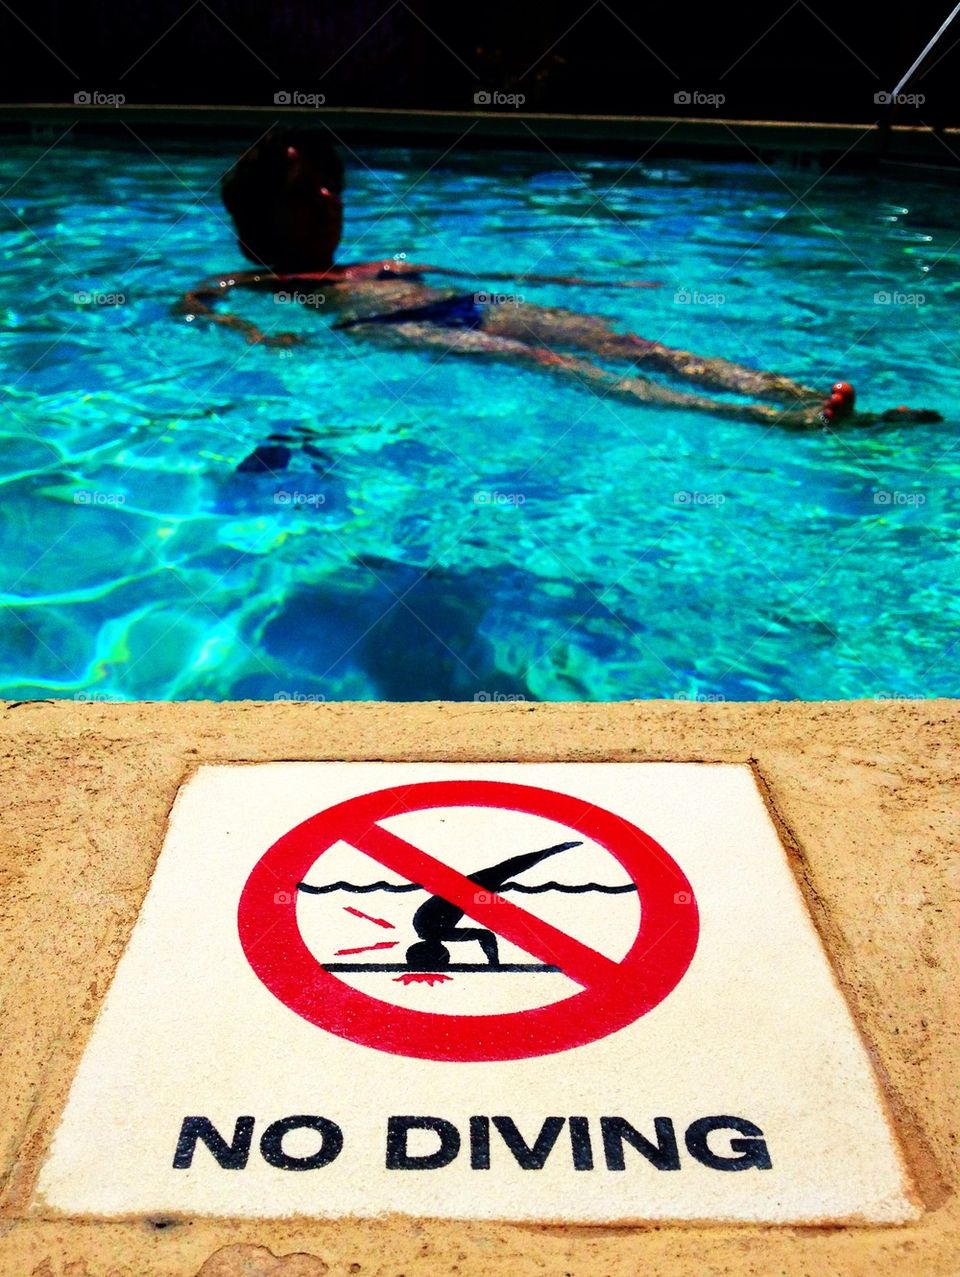 No diving in this pool!